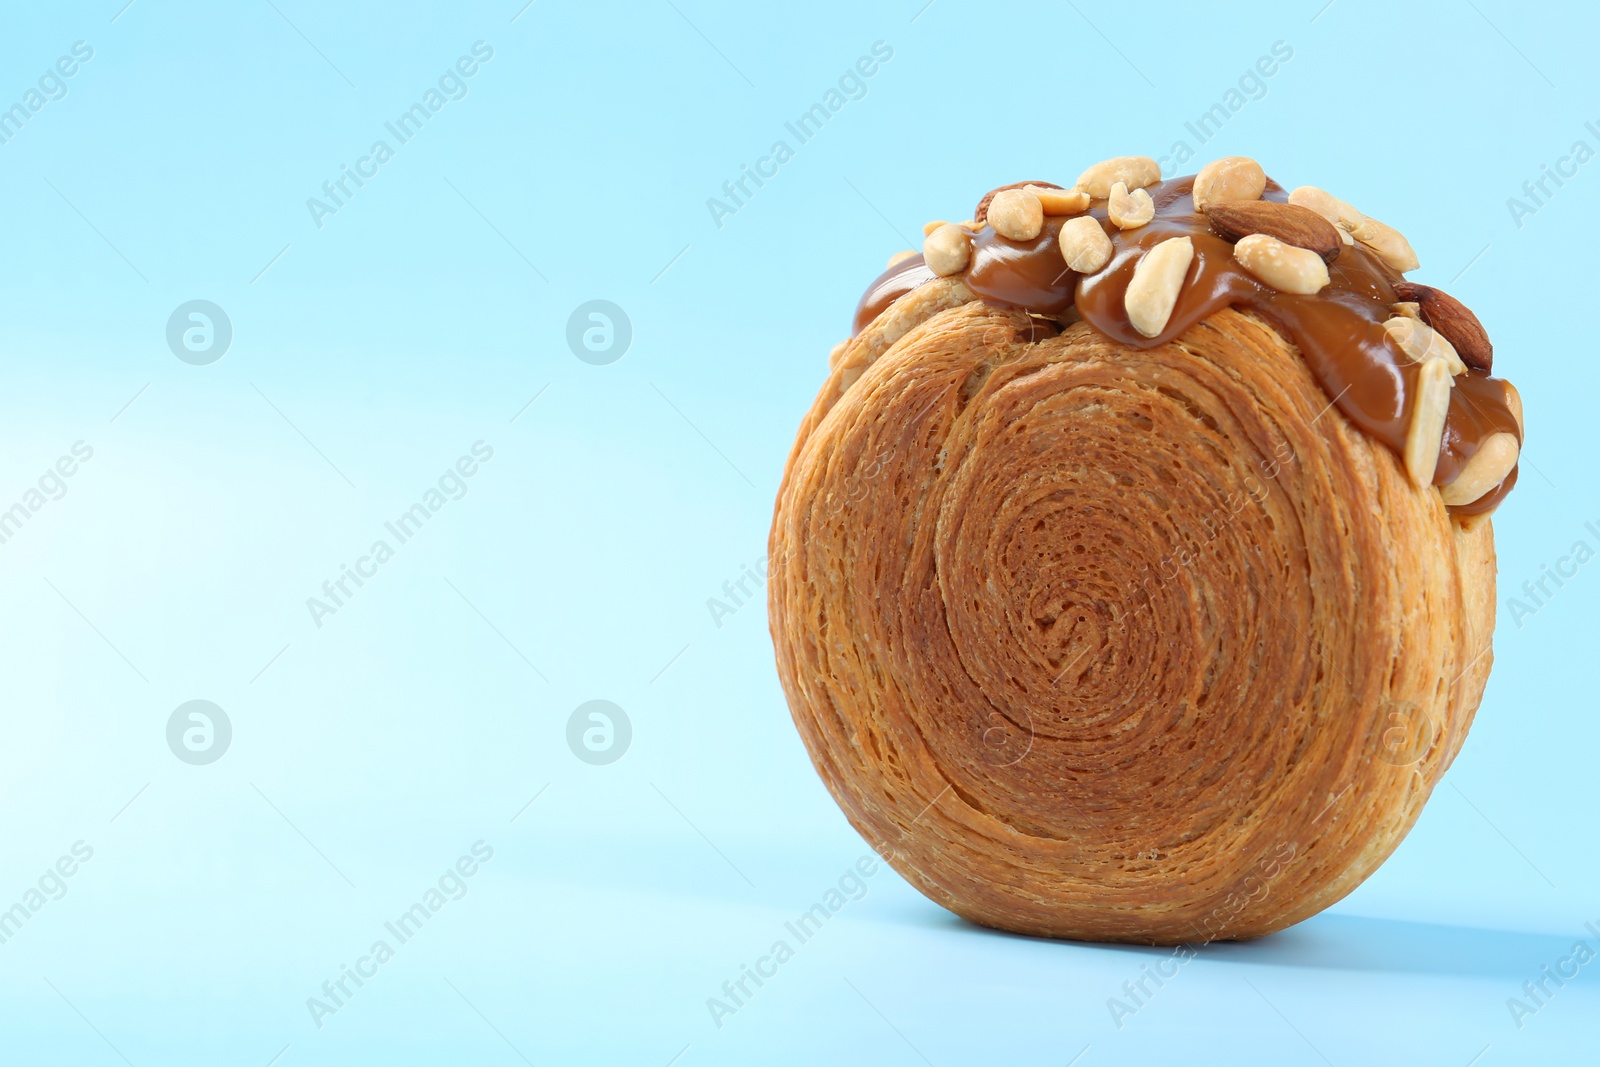 Photo of One supreme croissant with chocolate paste and nuts on light blue background, closeup with space for text. Tasty puff pastry